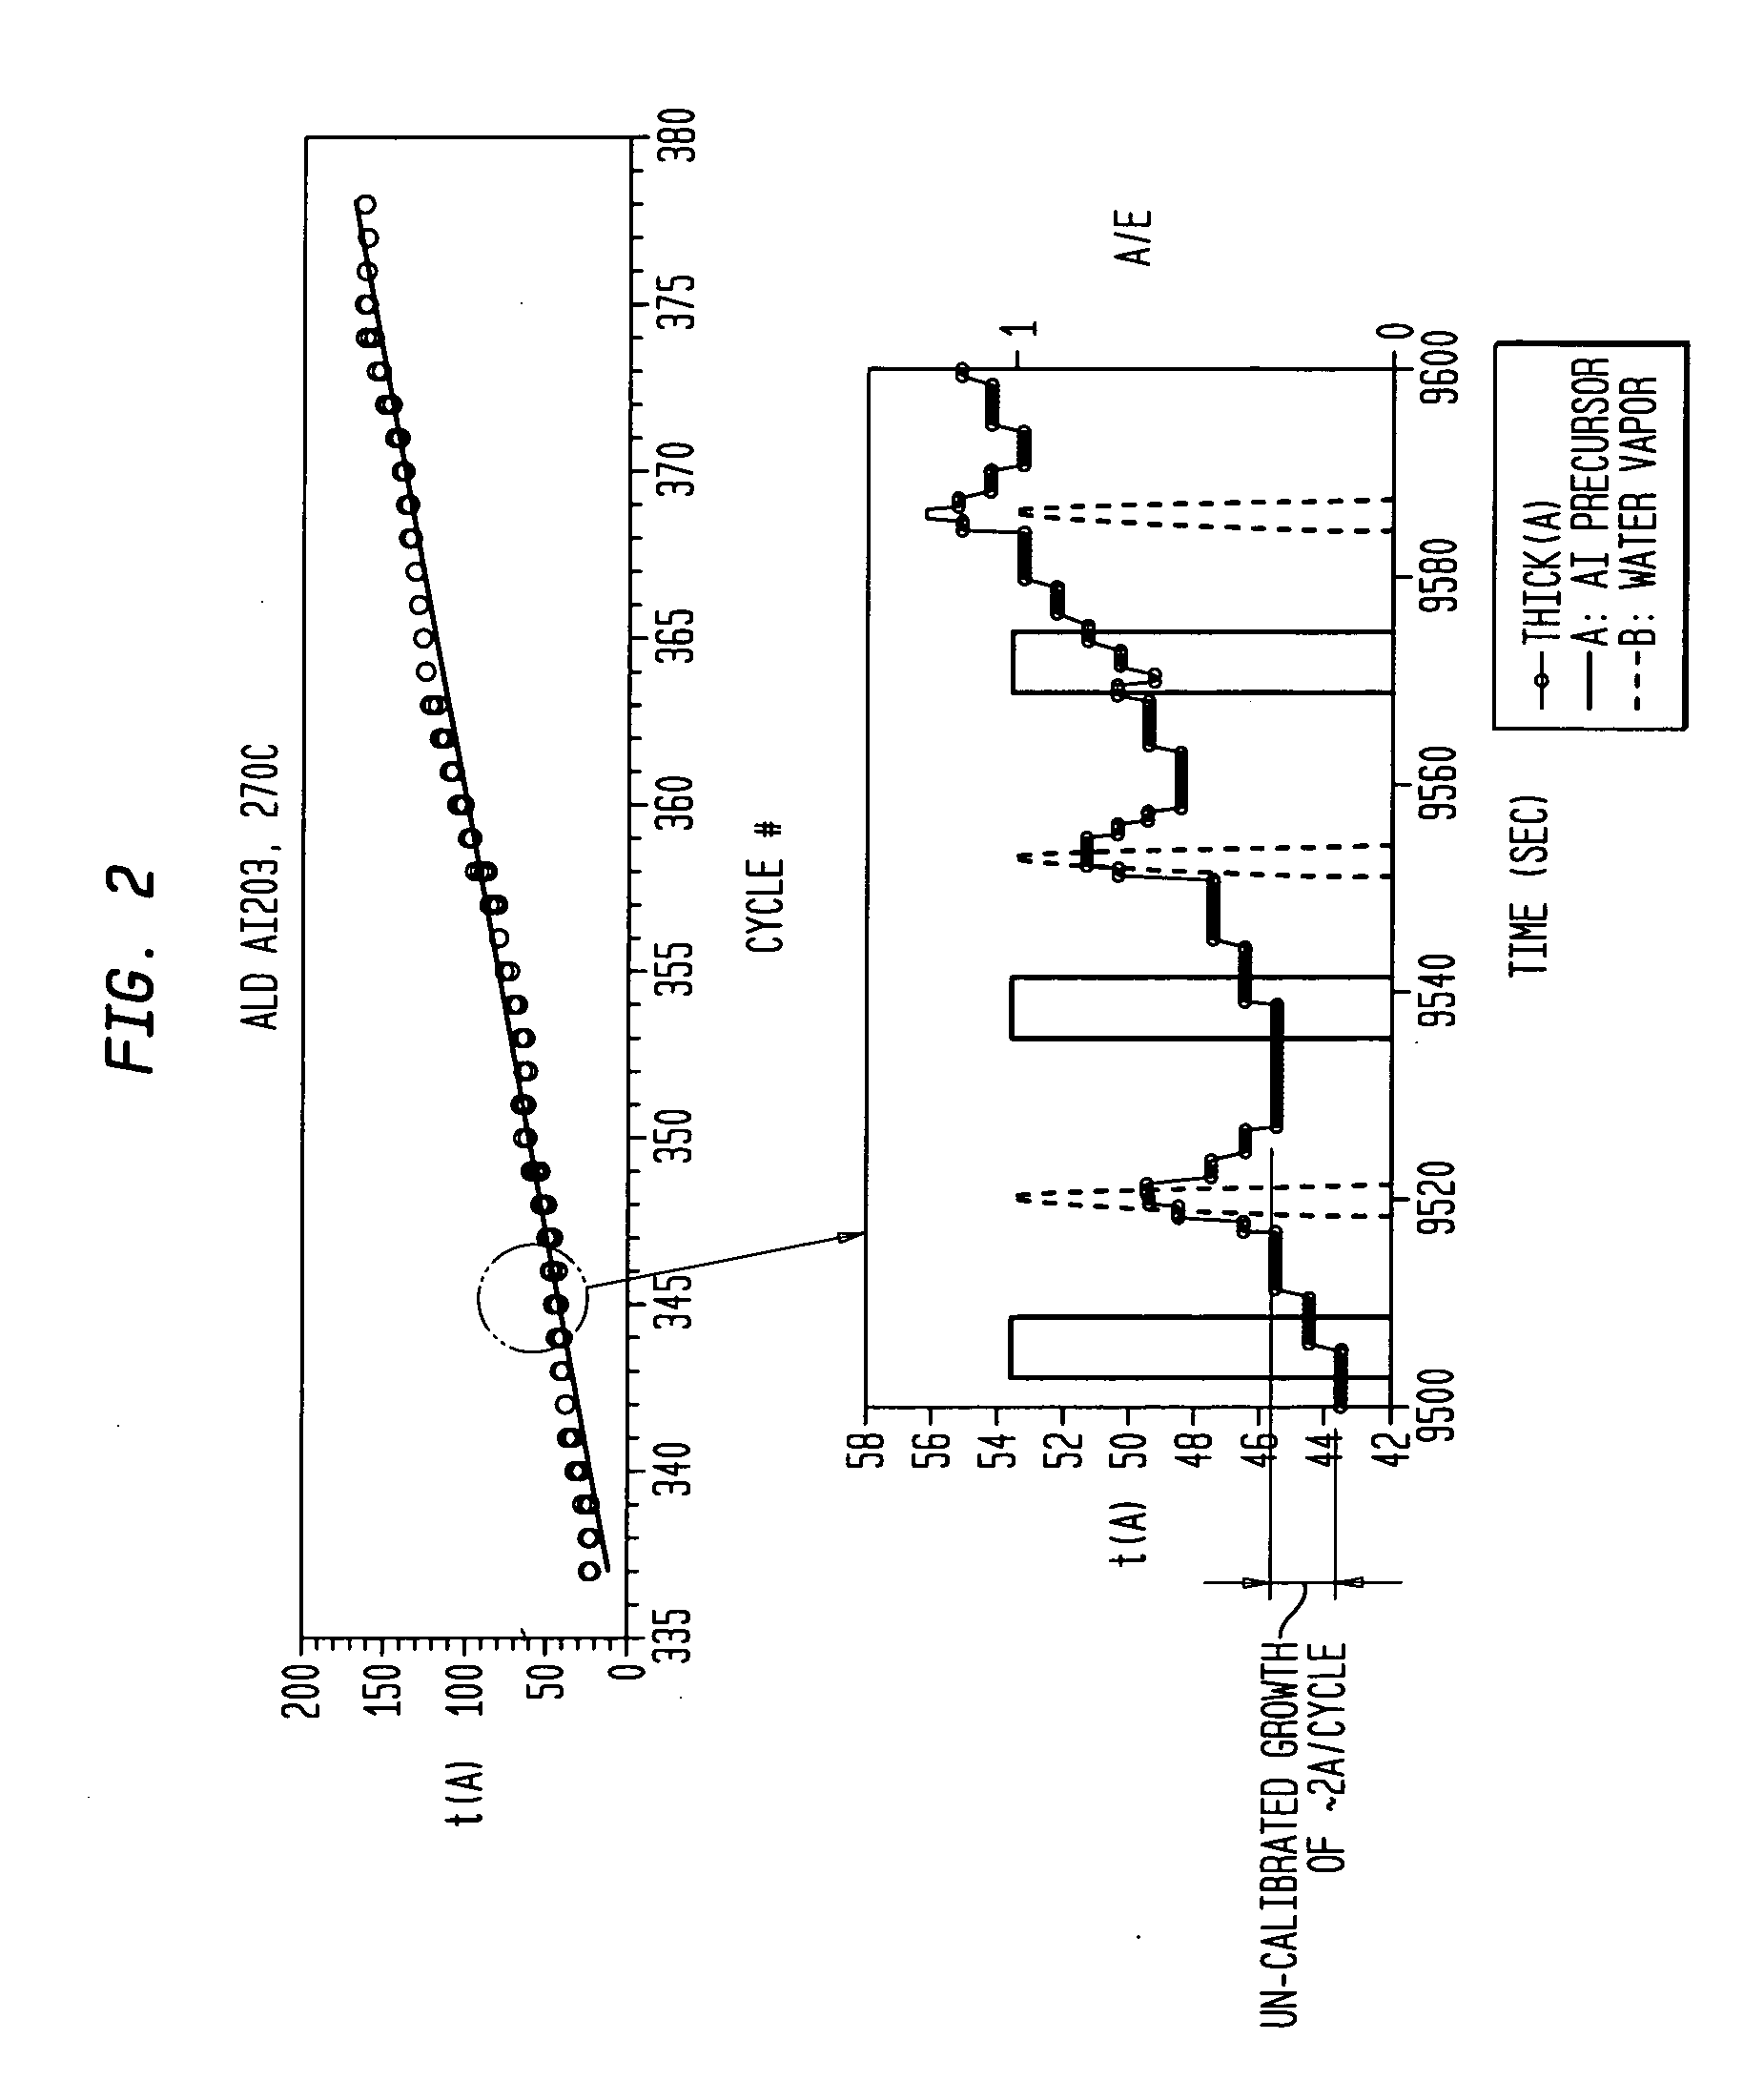 Method and apparatus for using solution based precursors for atomic layer deposition